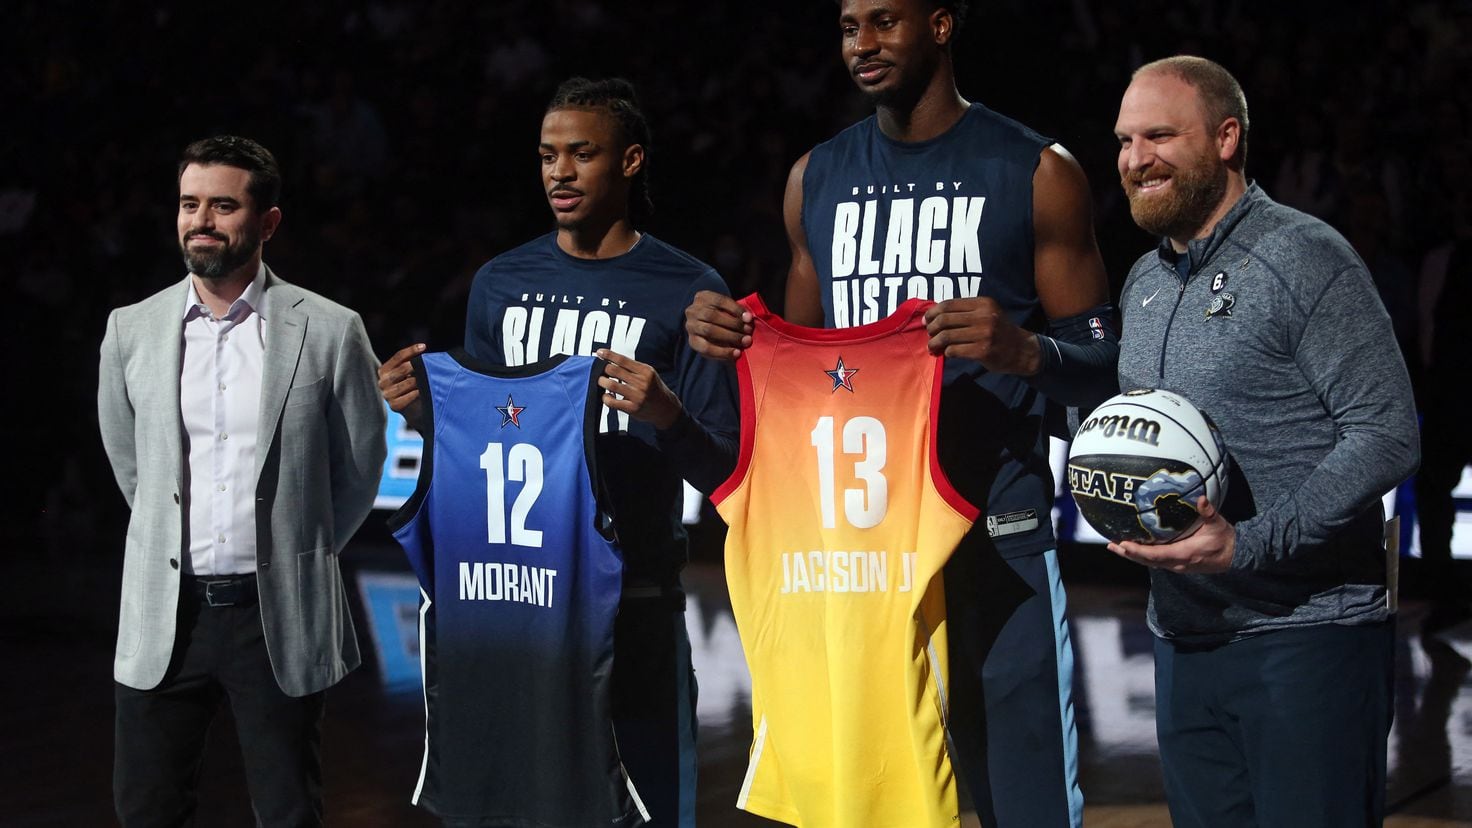 2023 NBA All-Star Game jerseys: What's the story behind the design? - AS USA